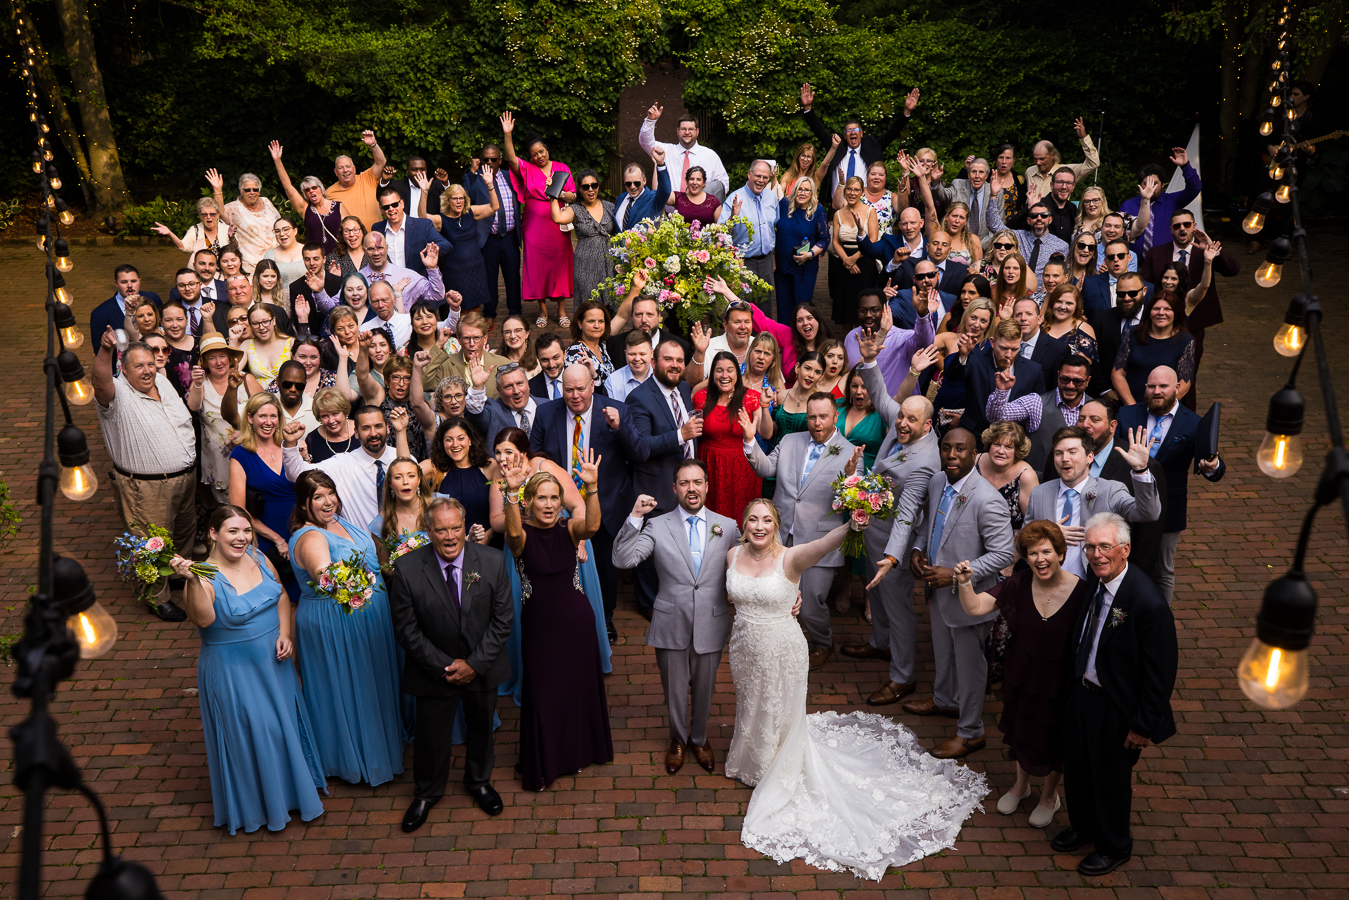 pa wedding photographer, lisa rhinehart, captures this big group shot of the bride and groom with their family and friends after their wedding ceremony 